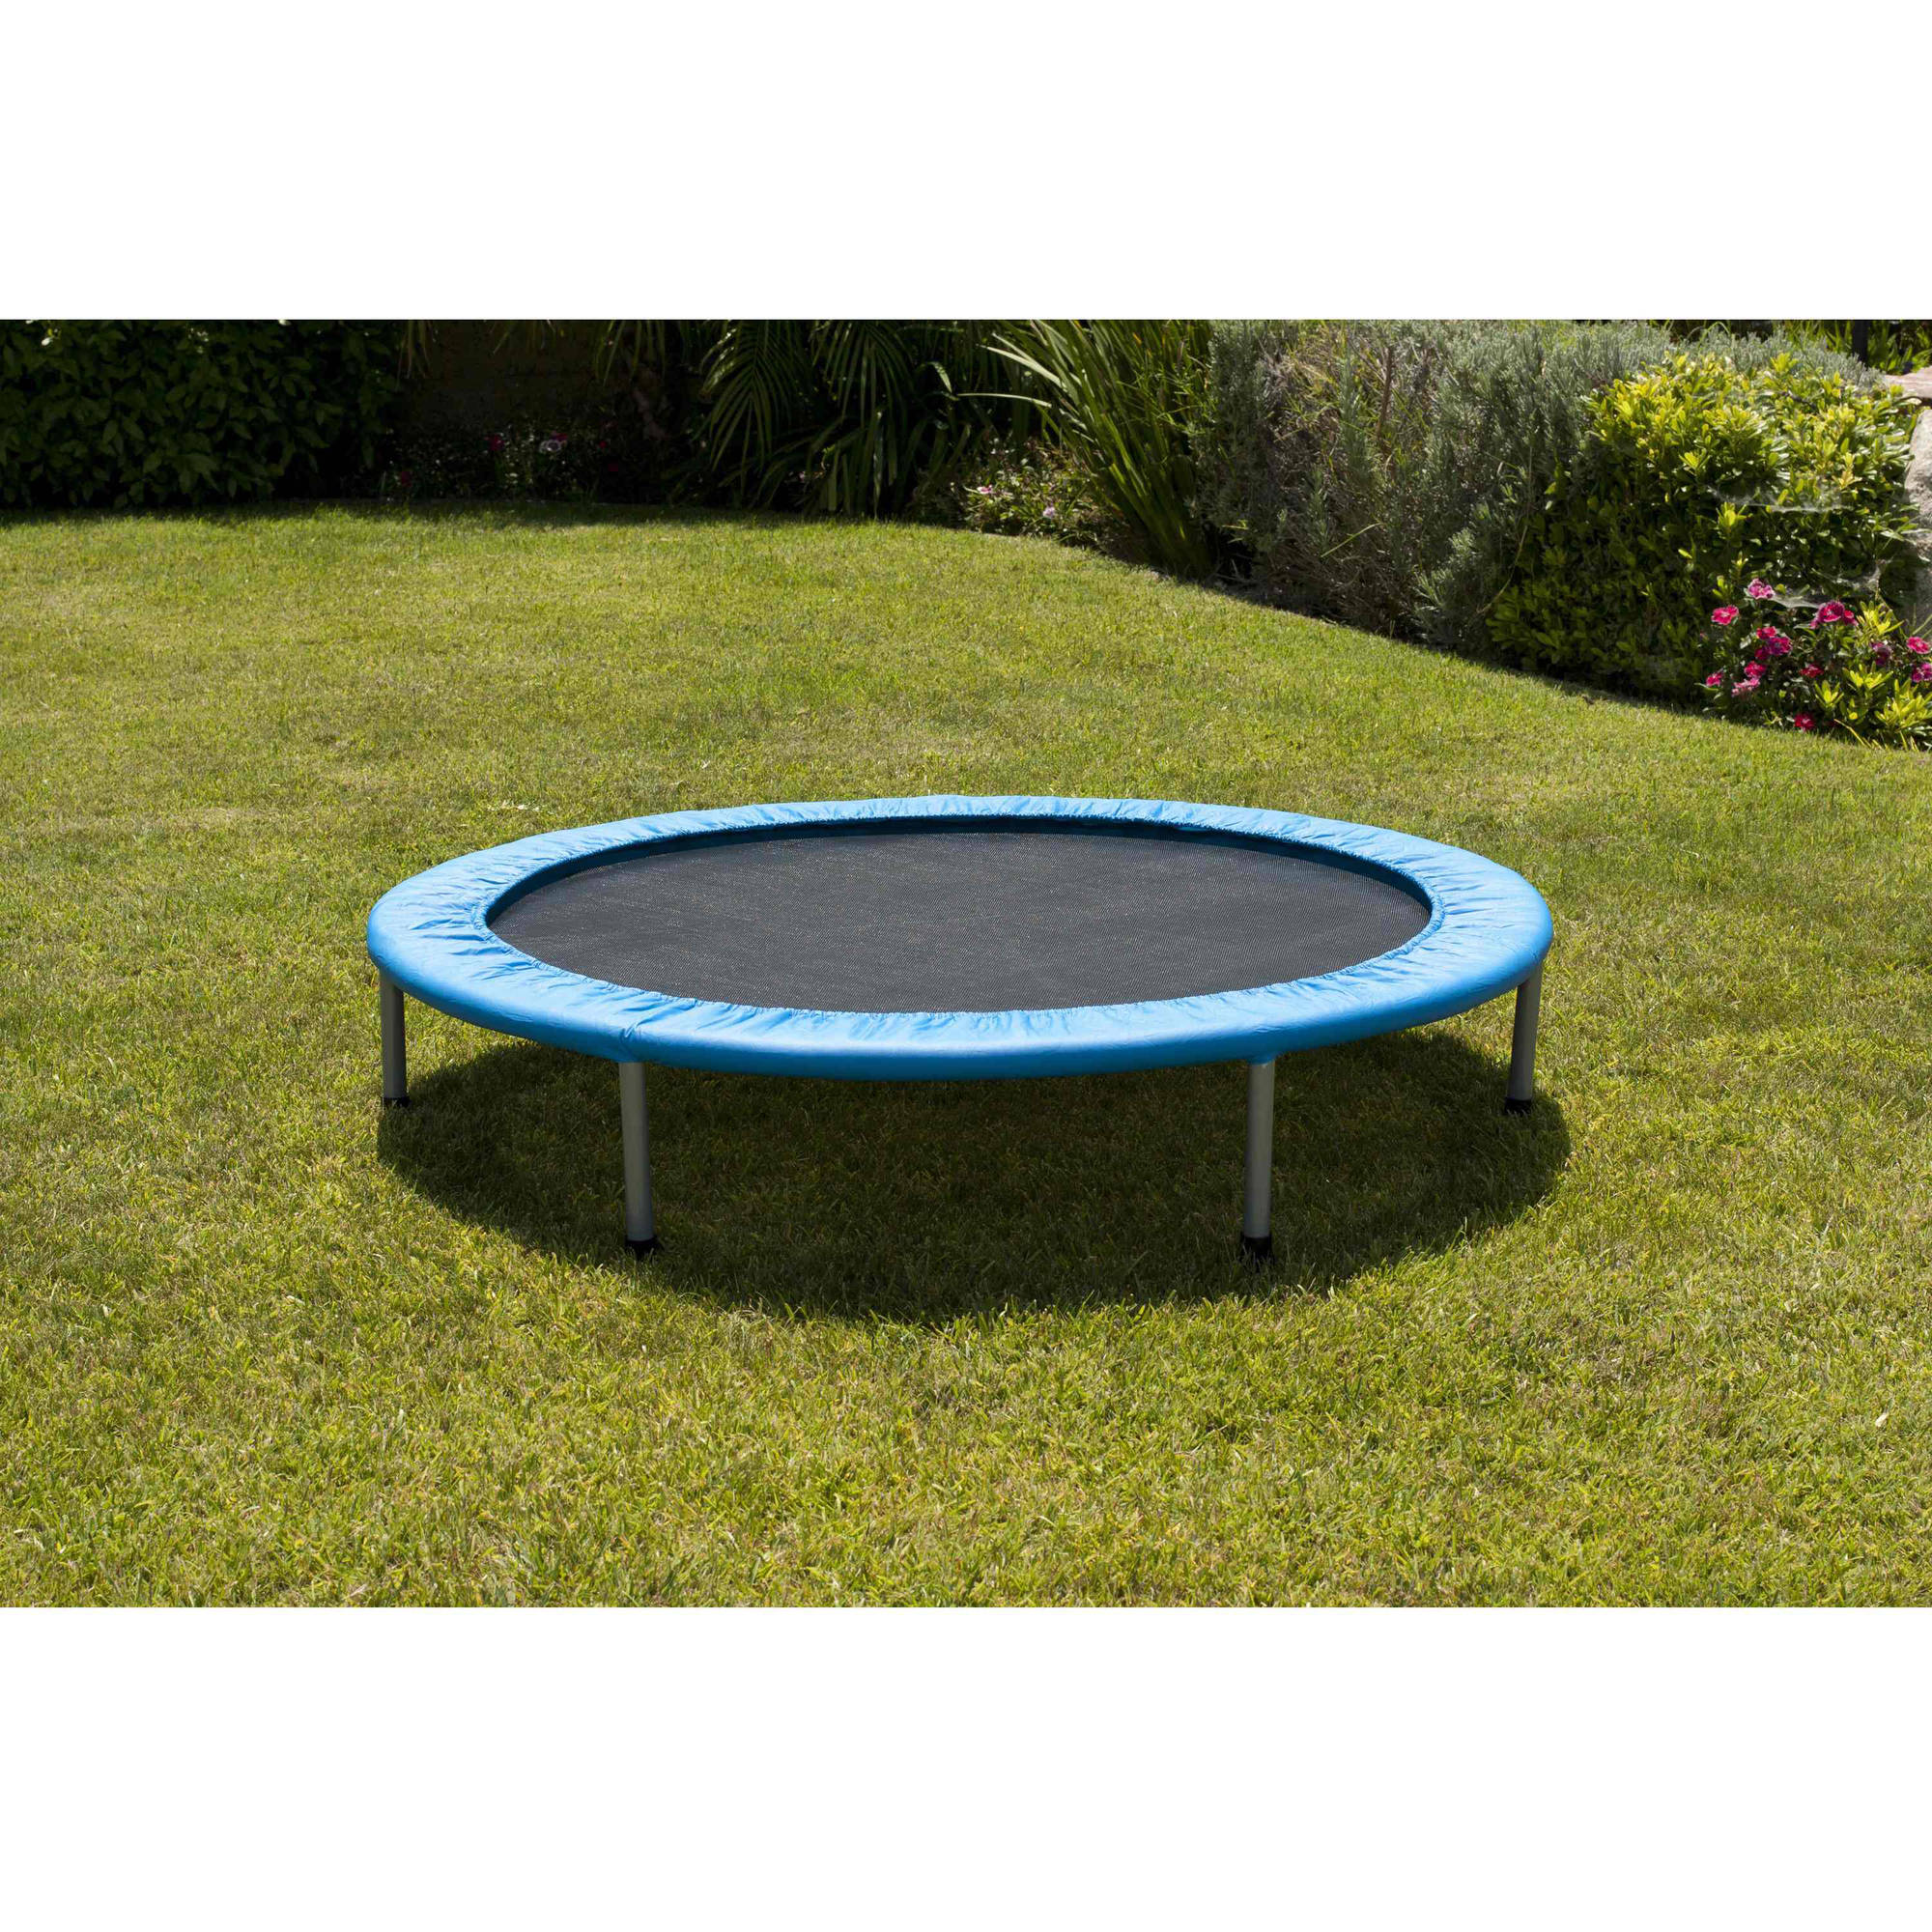 Airzone 38-Inch Fitness Trampoline, Blue - image 3 of 4